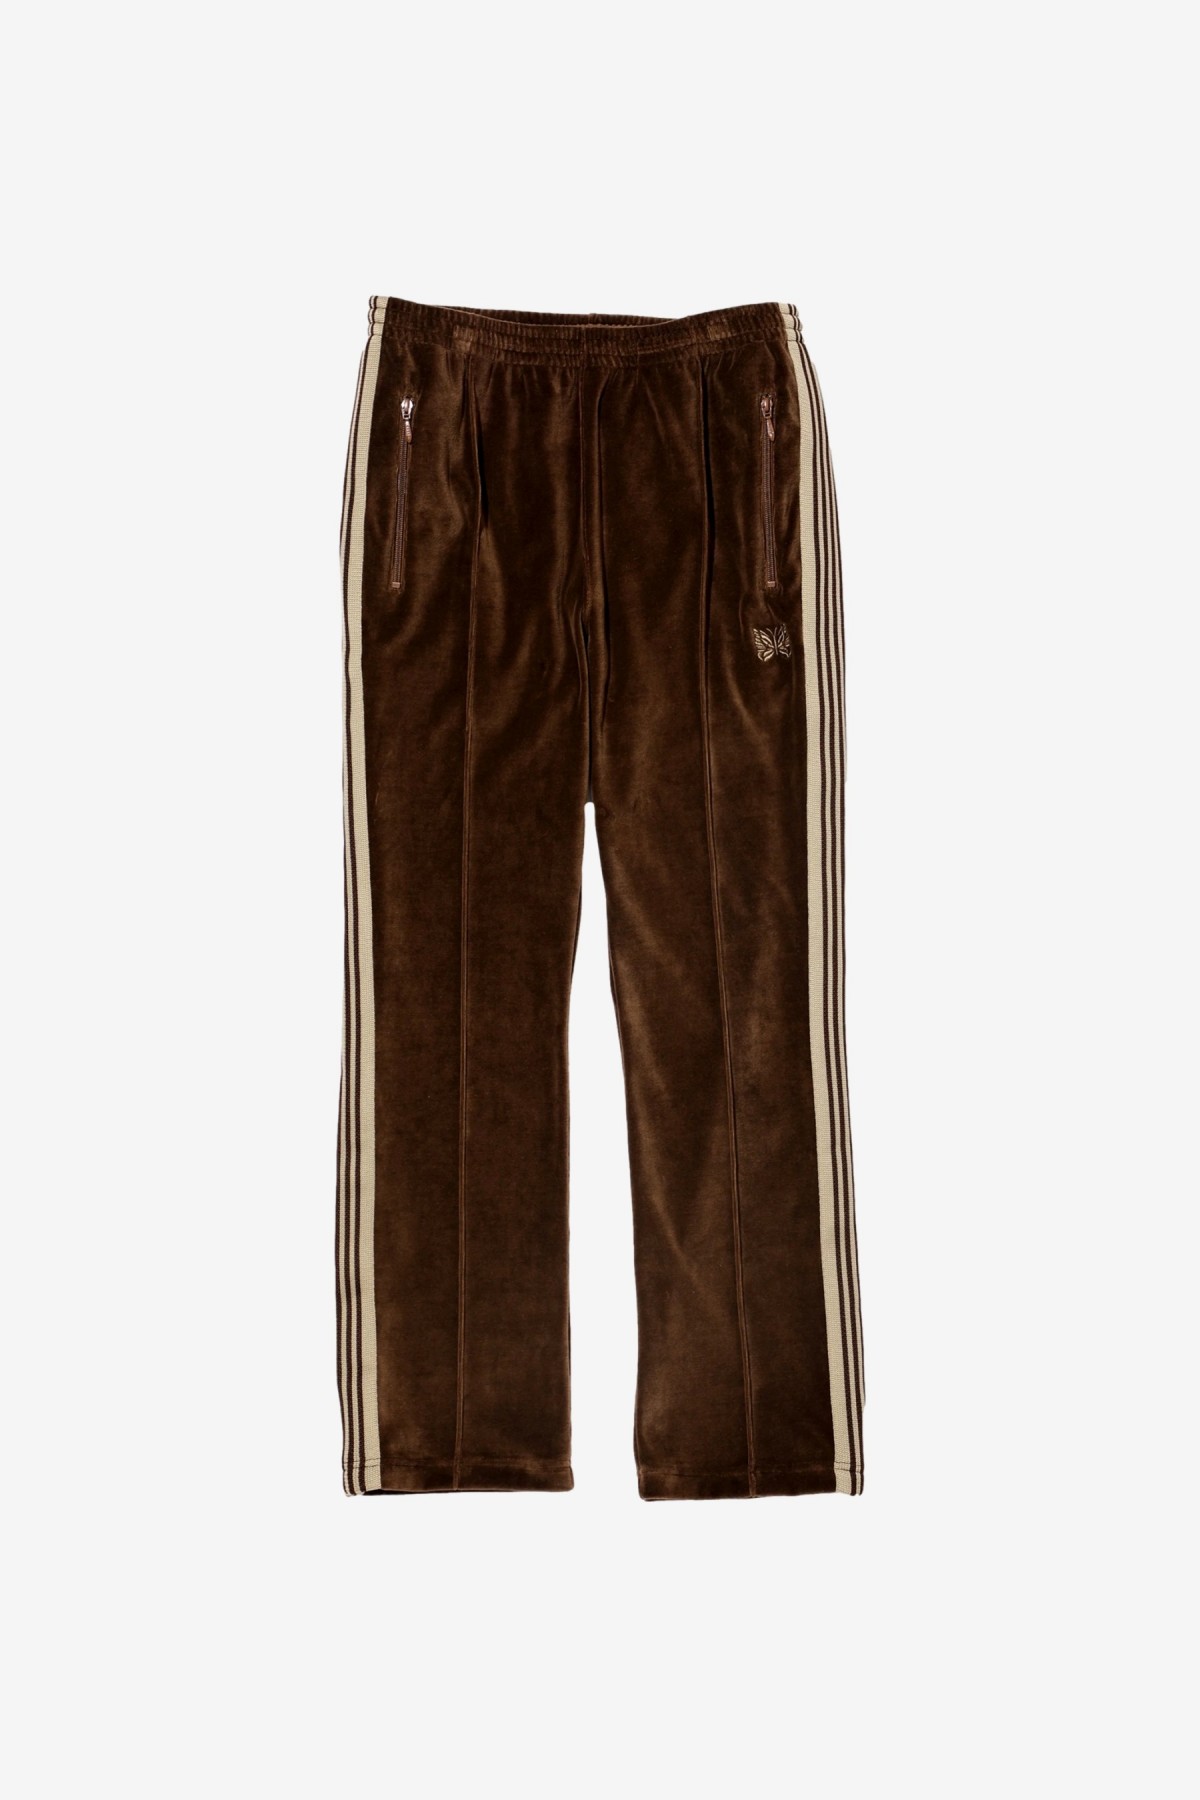 Needles Narrow Track Pant in Brown